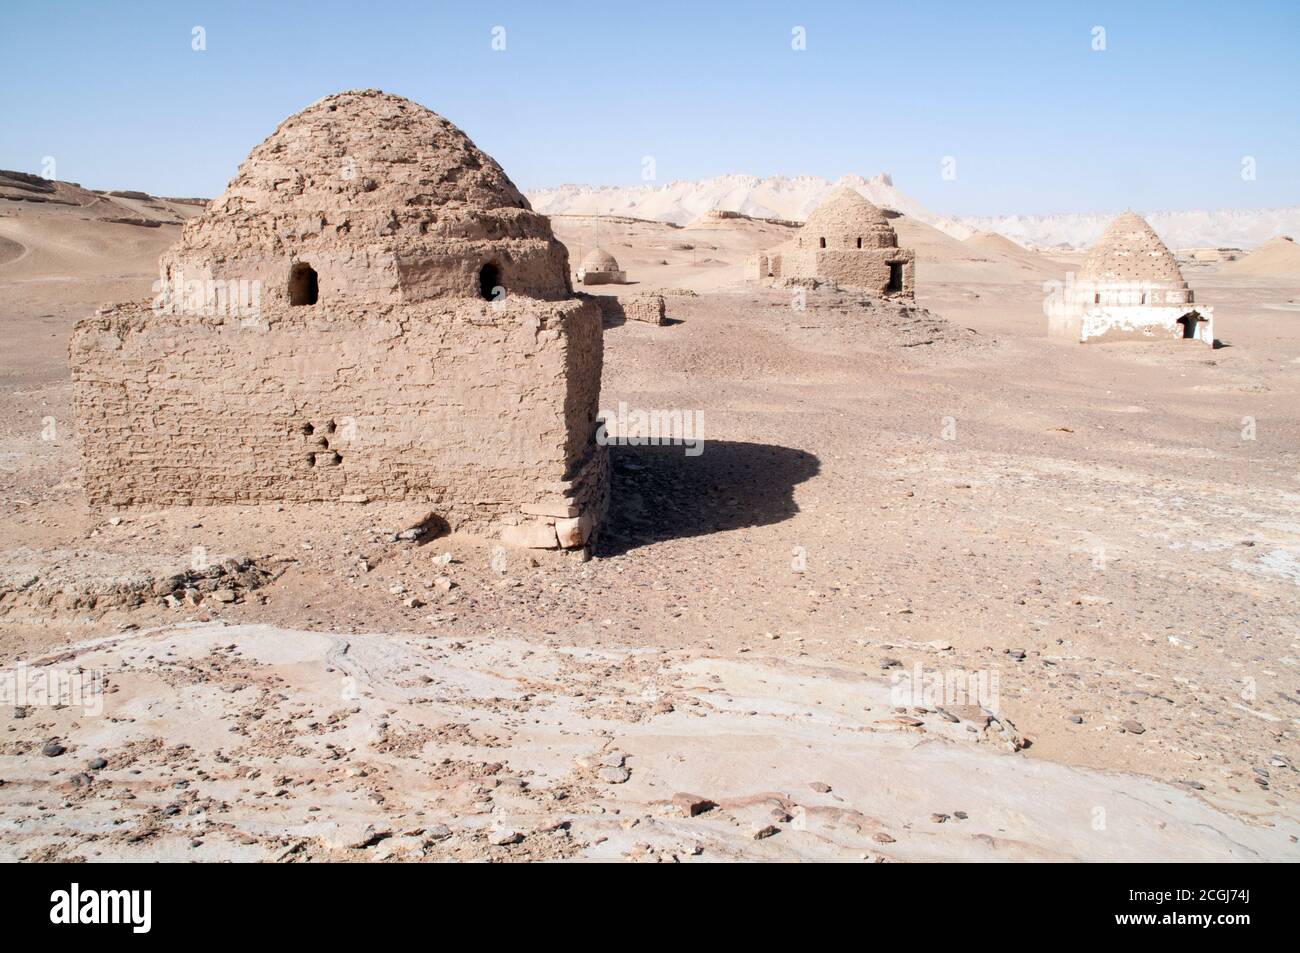 Islamic mausoleums in the medieval Saharan village of al Qasr, in Dakhla Oasis, in the Western Desert of the Sahara, New Valley Governorate, Egypt. Stock Photo